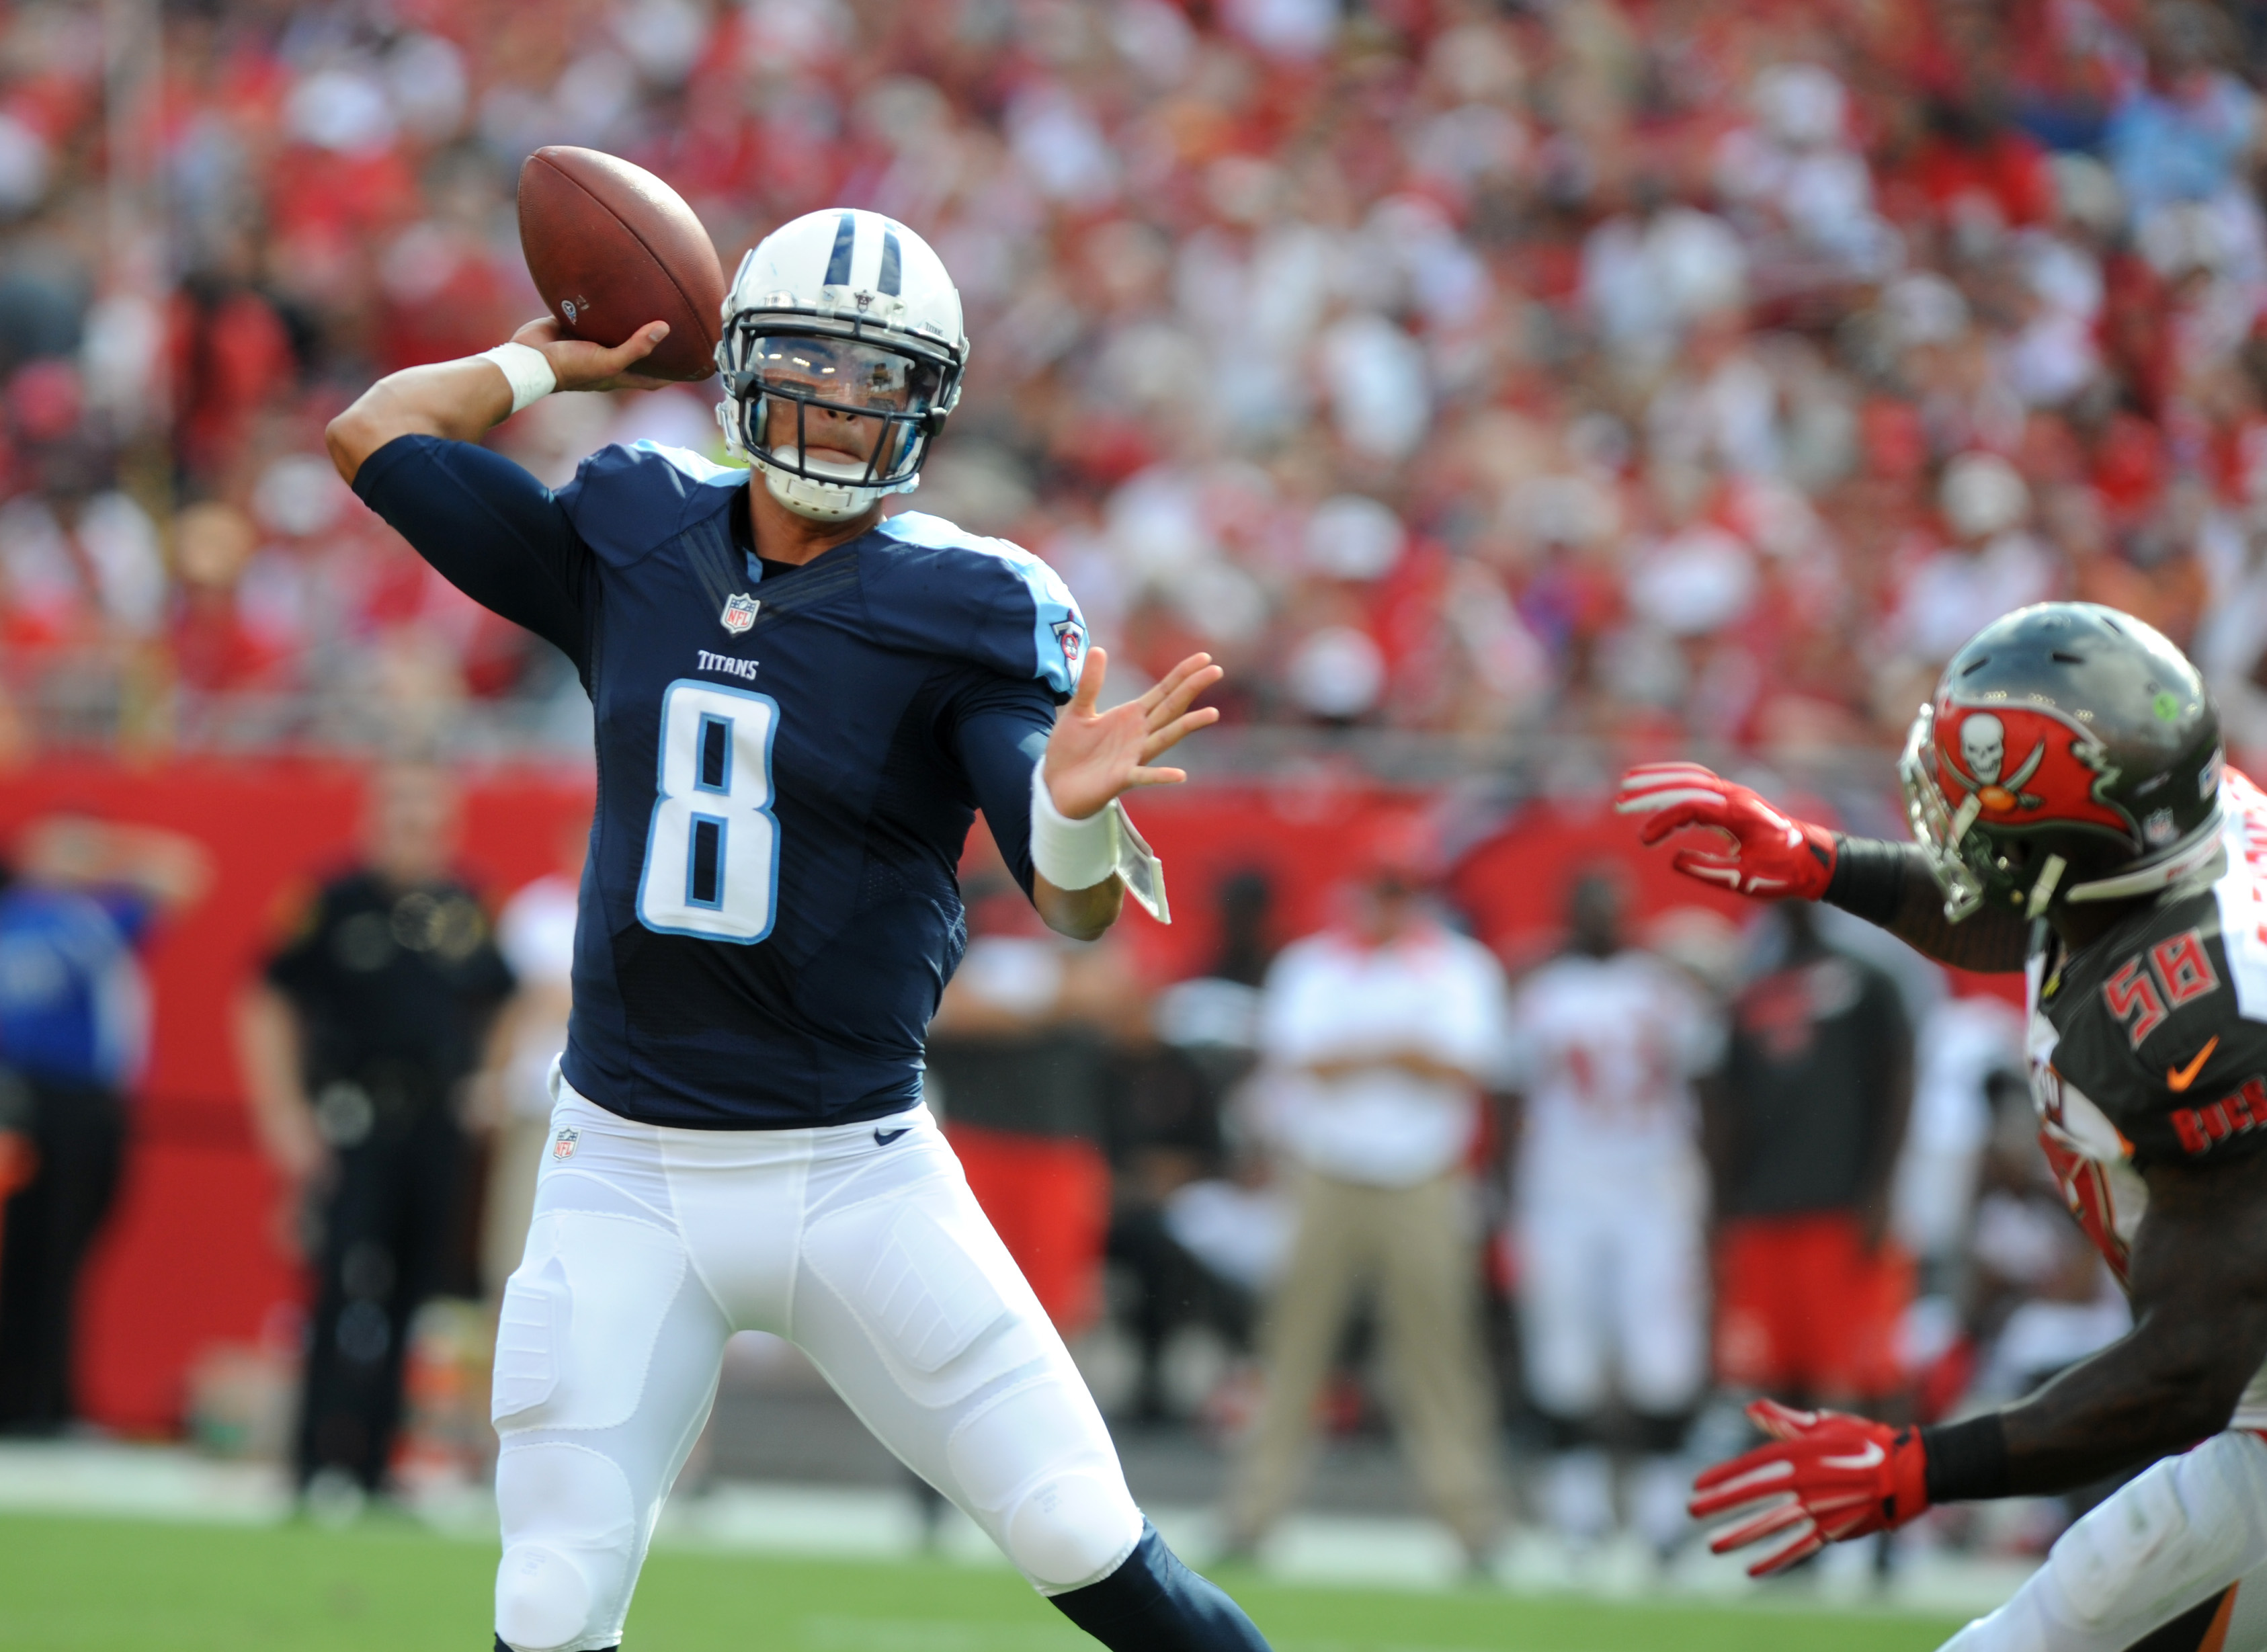 Marcus Mariota has had an historic opening day in the NFL (Getty).